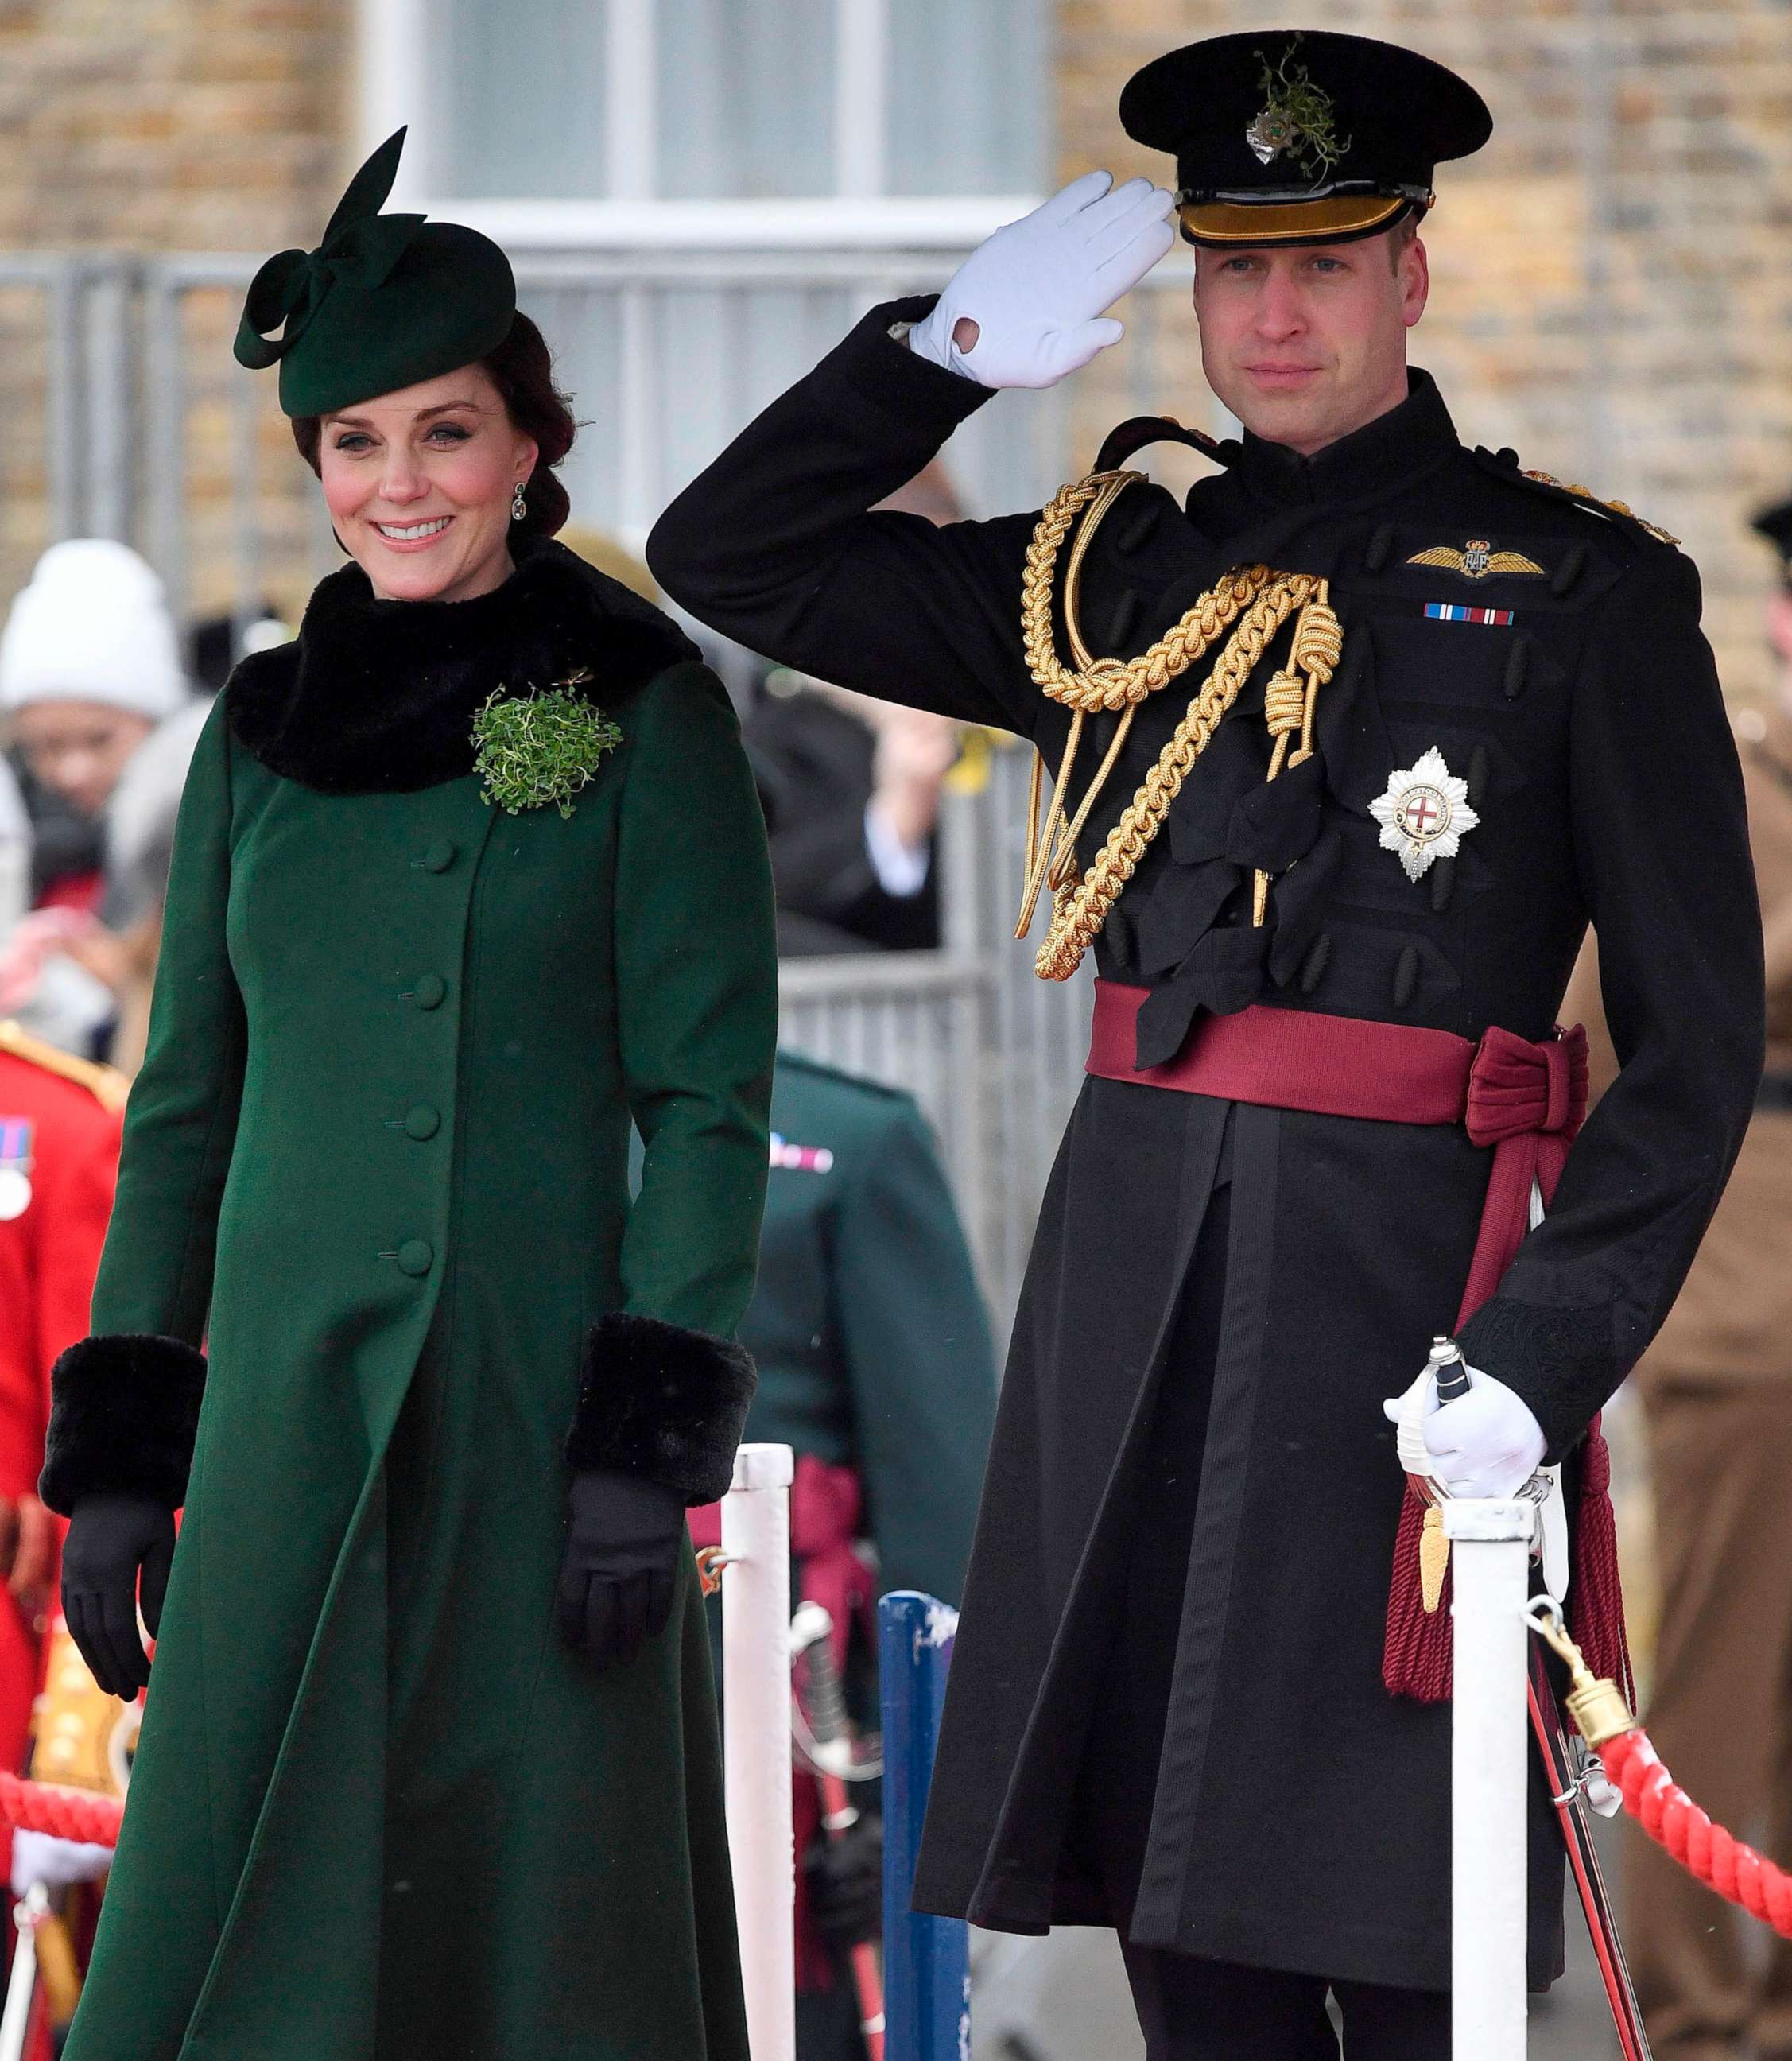 PHOTO: Kate and Prince William attend the St. Patrick's Day Parade with the 1st Battalion Irish Guards at Cavalry Barracks, Hounslow, London, March 17, 2018.